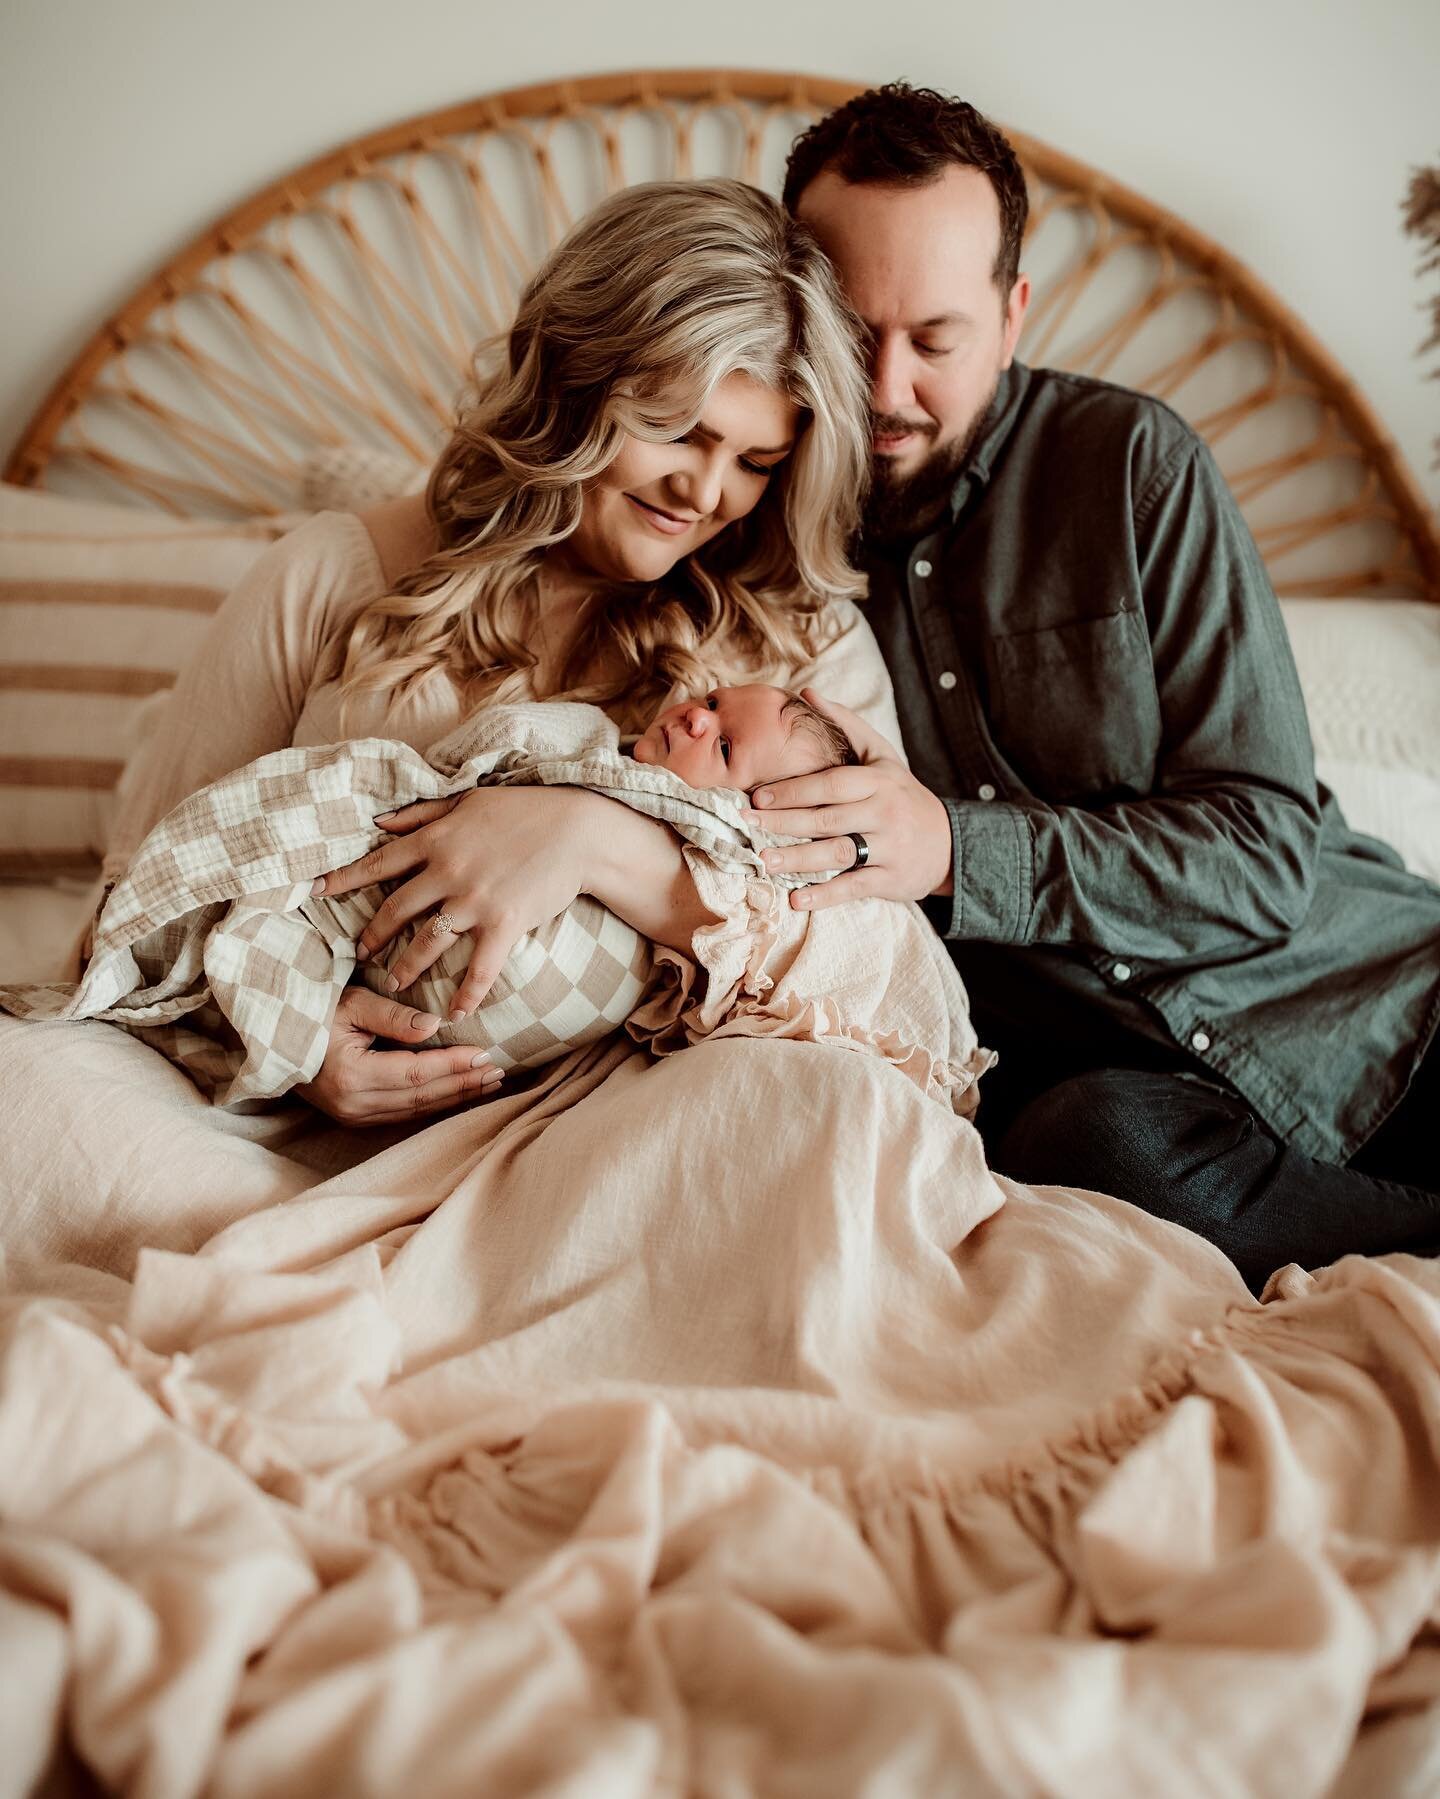 I really need more than 10 squares for this gorgeous little family. 🤩

#wichitaphotographer #kansasphotographer #ictphotographer #childhoodphotography #motherhood #motherhoodphotography #hellostoryteller #motherhoodiscolorful #emotionalstorytelling 